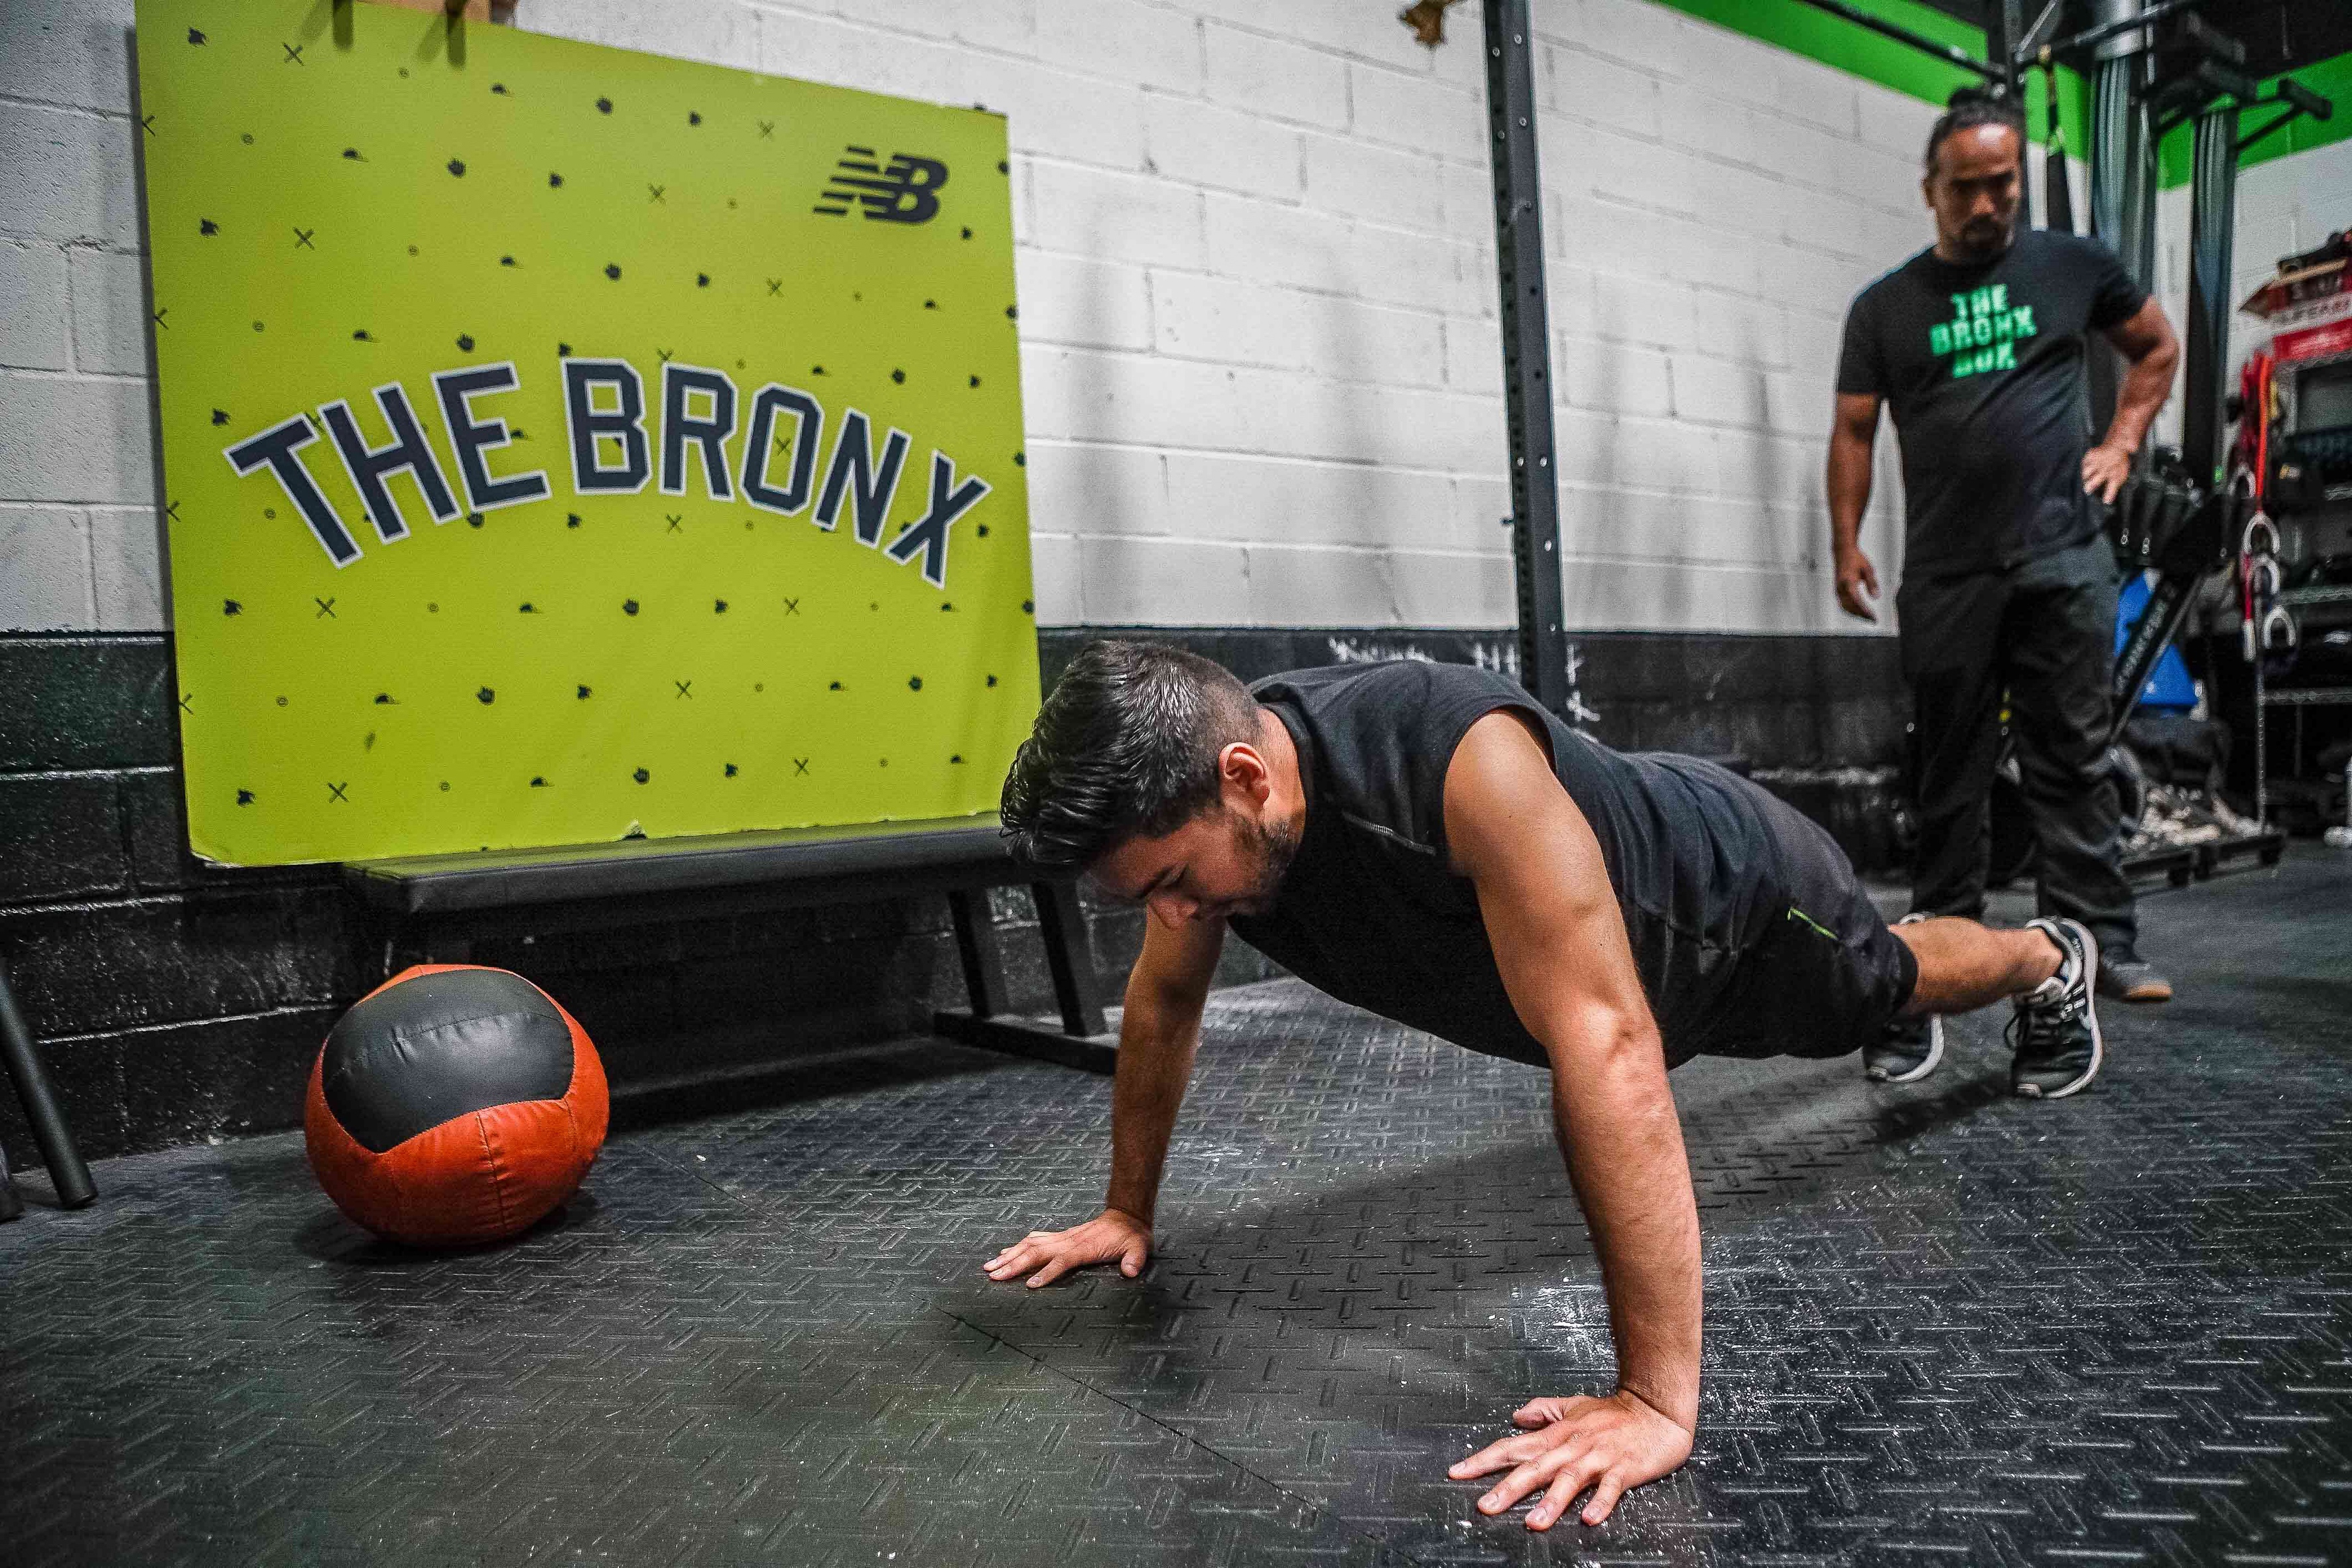 so_bro_crossfit_bronx_box_dandy_in_the_bronx_001 At the gym, CrossFit, working out, exercise